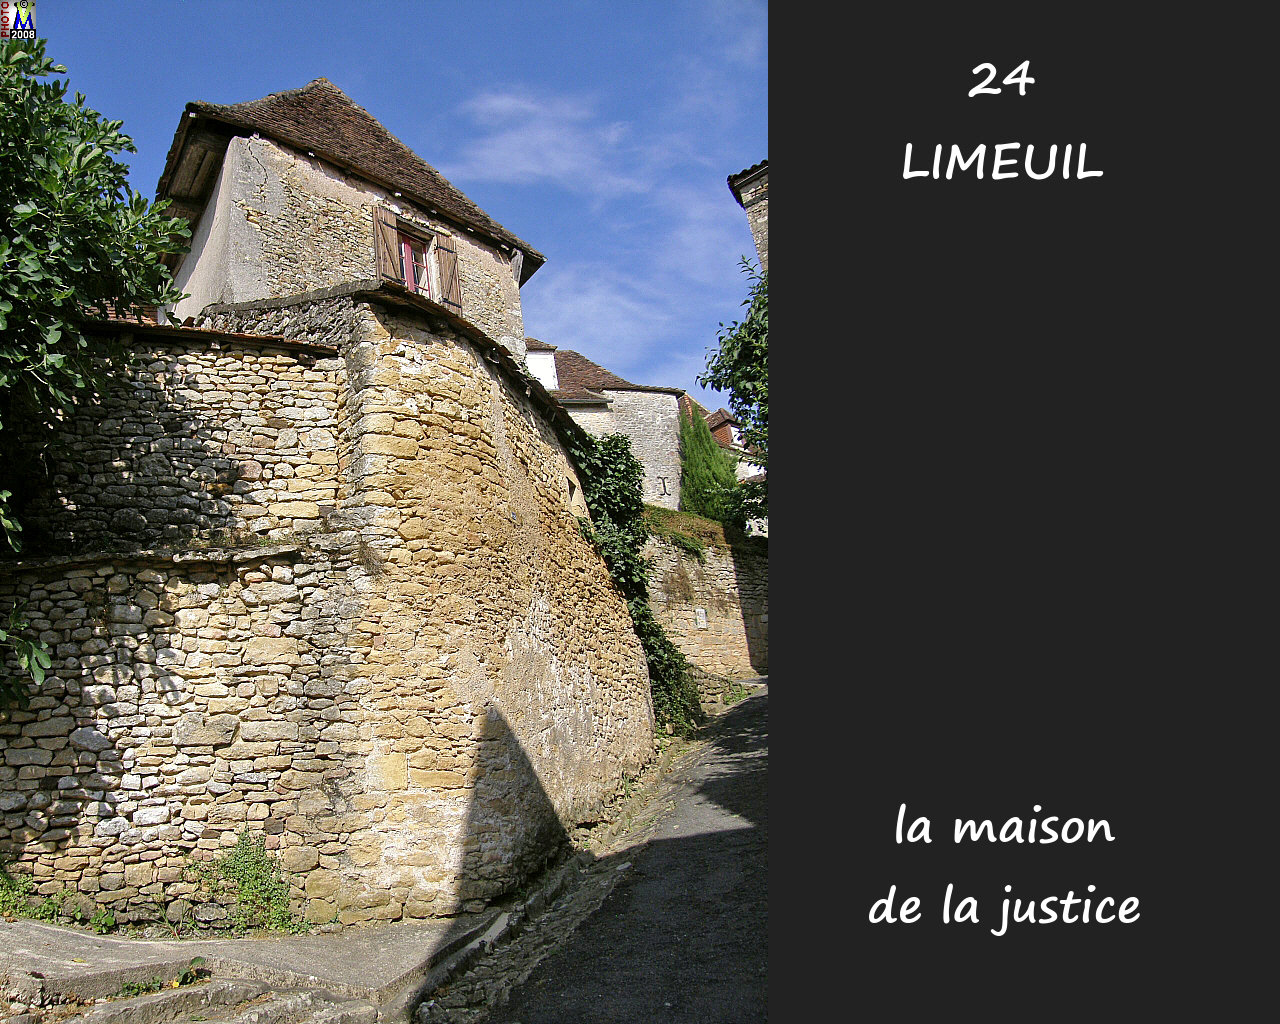 24LIMEUIL_justice_100.jpg